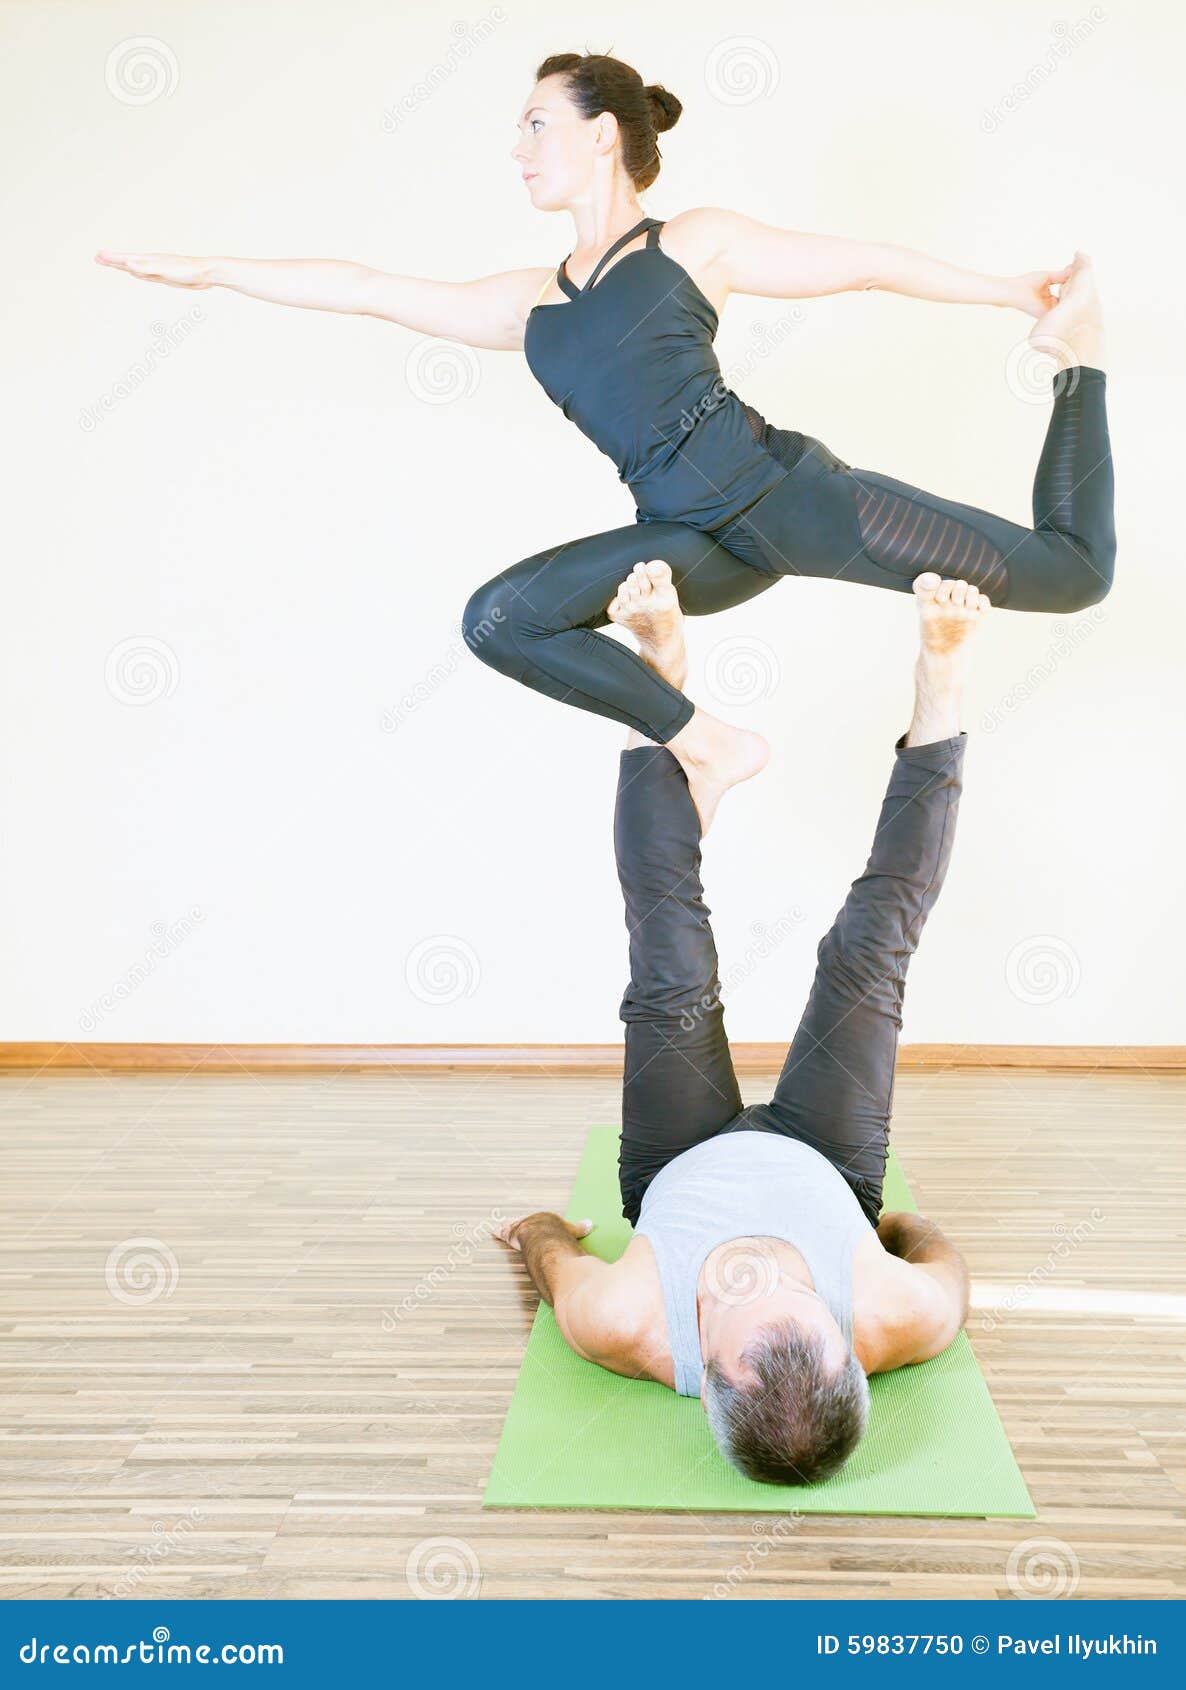 Man and Woman Doing Acro Yoga or Pair Yoga Indoor Stock Photo - Image of  assist, girl: 59837750